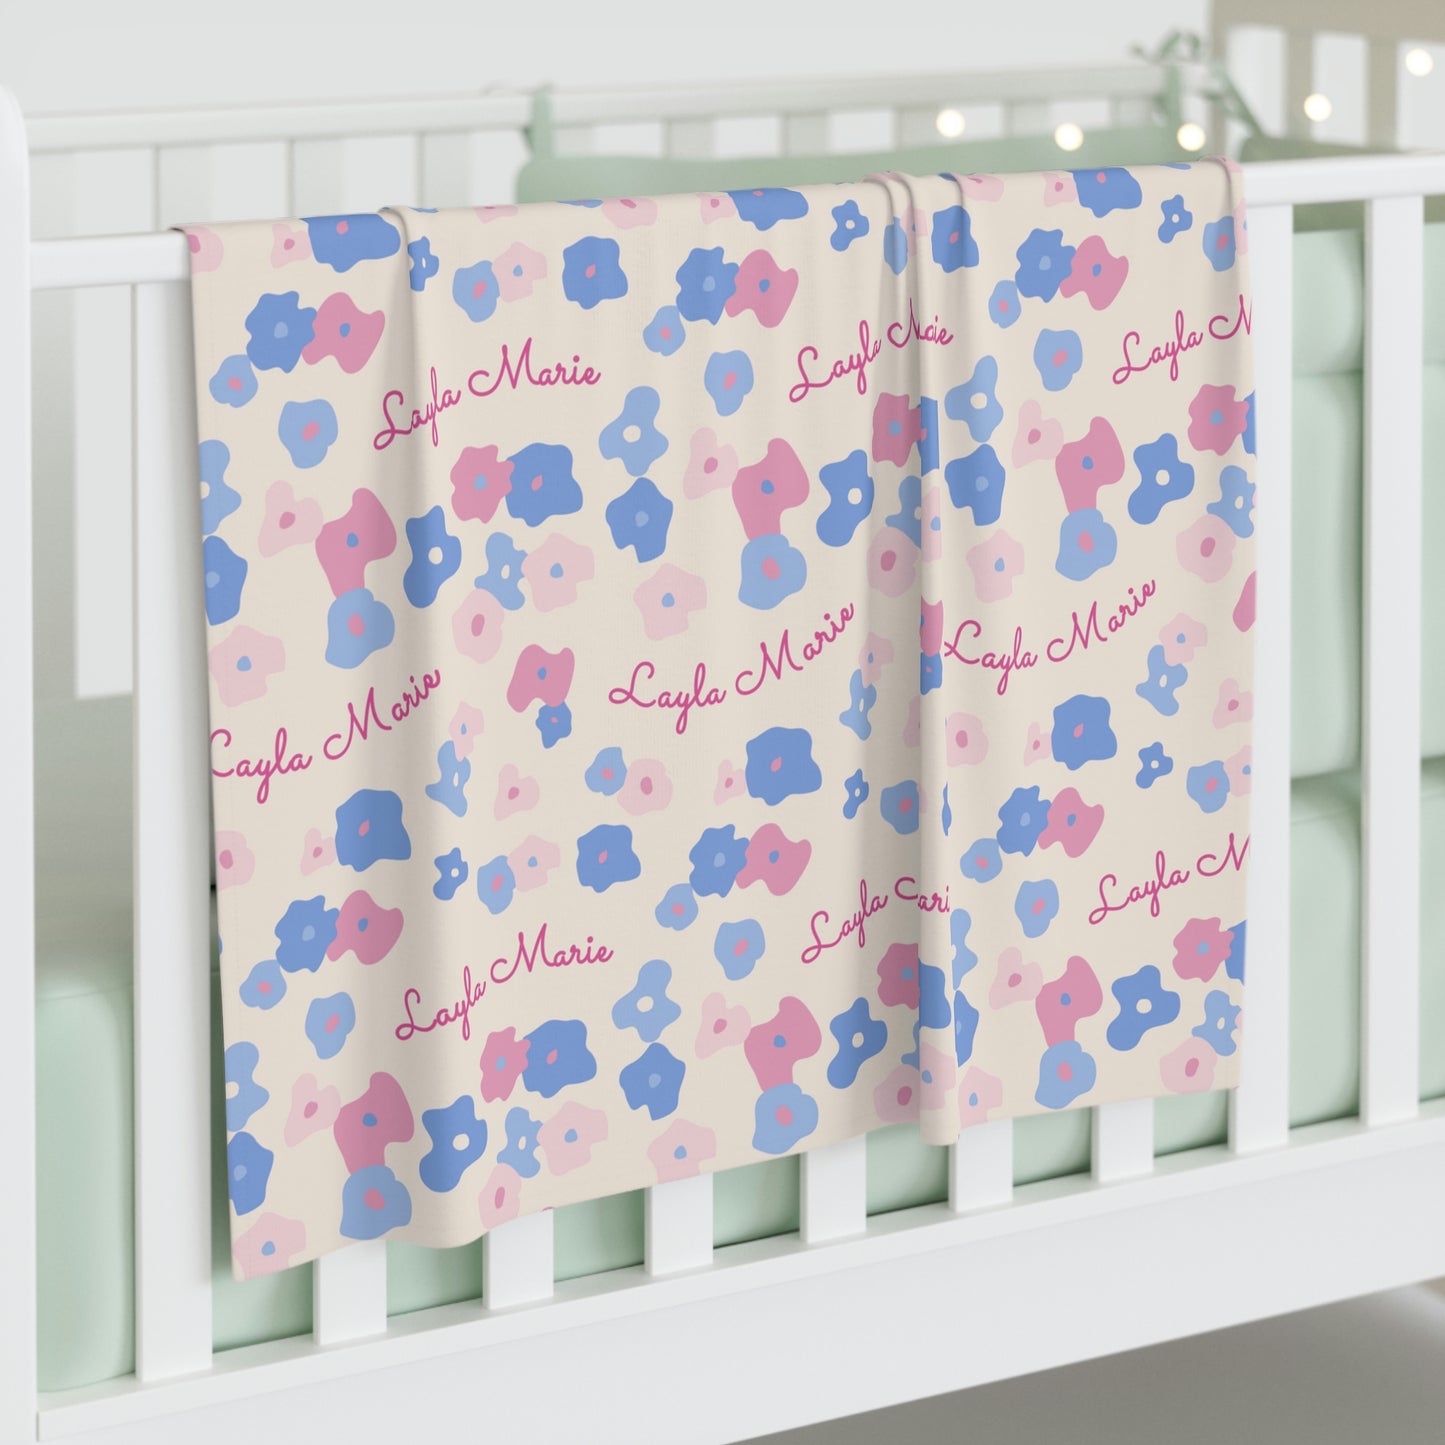 Jersey personalized baby blanket in graphic pink and blue daisy pattern hung over side of white crib